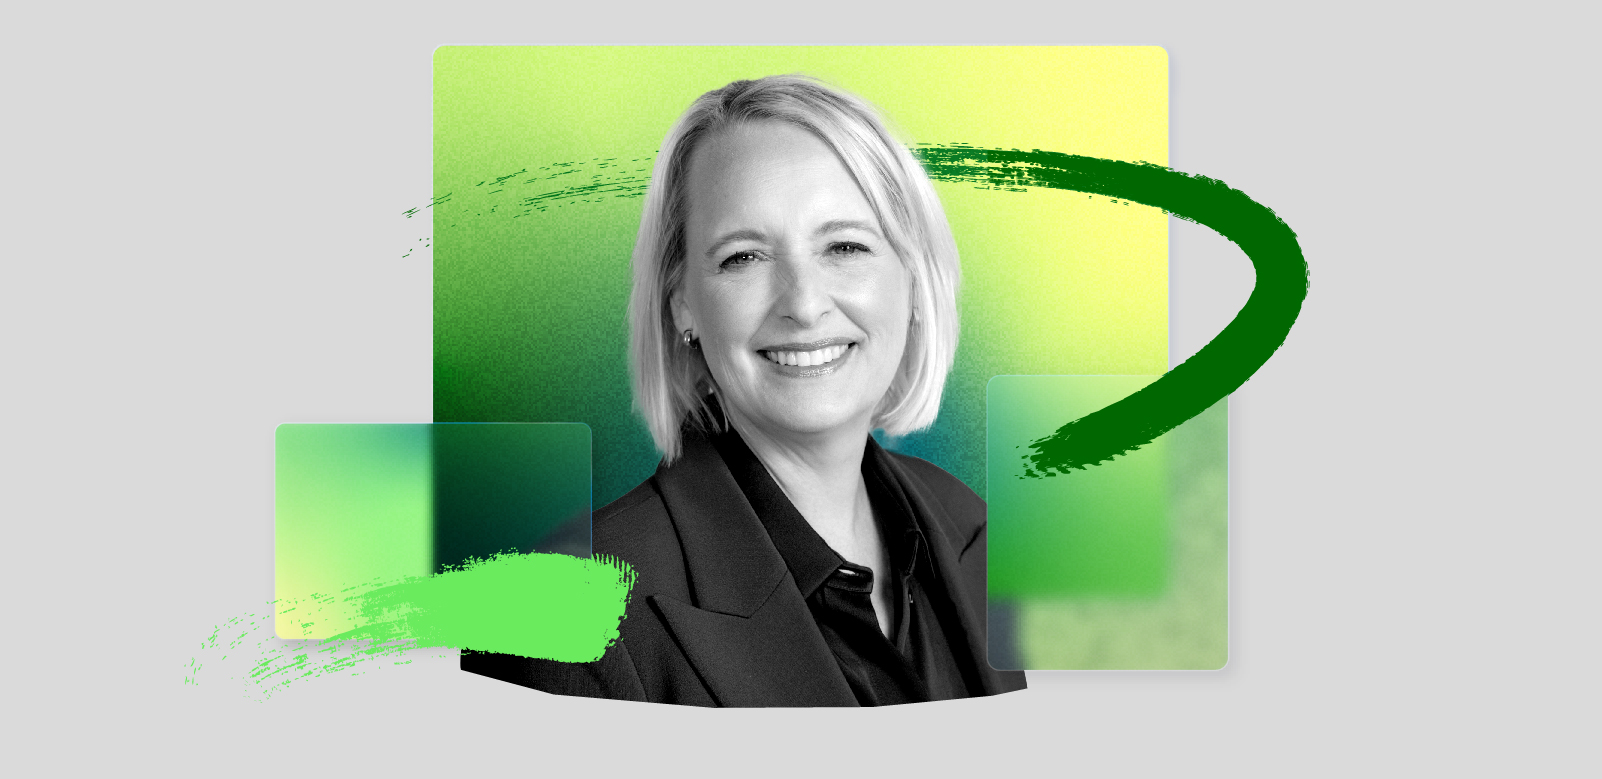 A colorful photo-illustration of Julie Sweet, chair and CEO of Accenture 